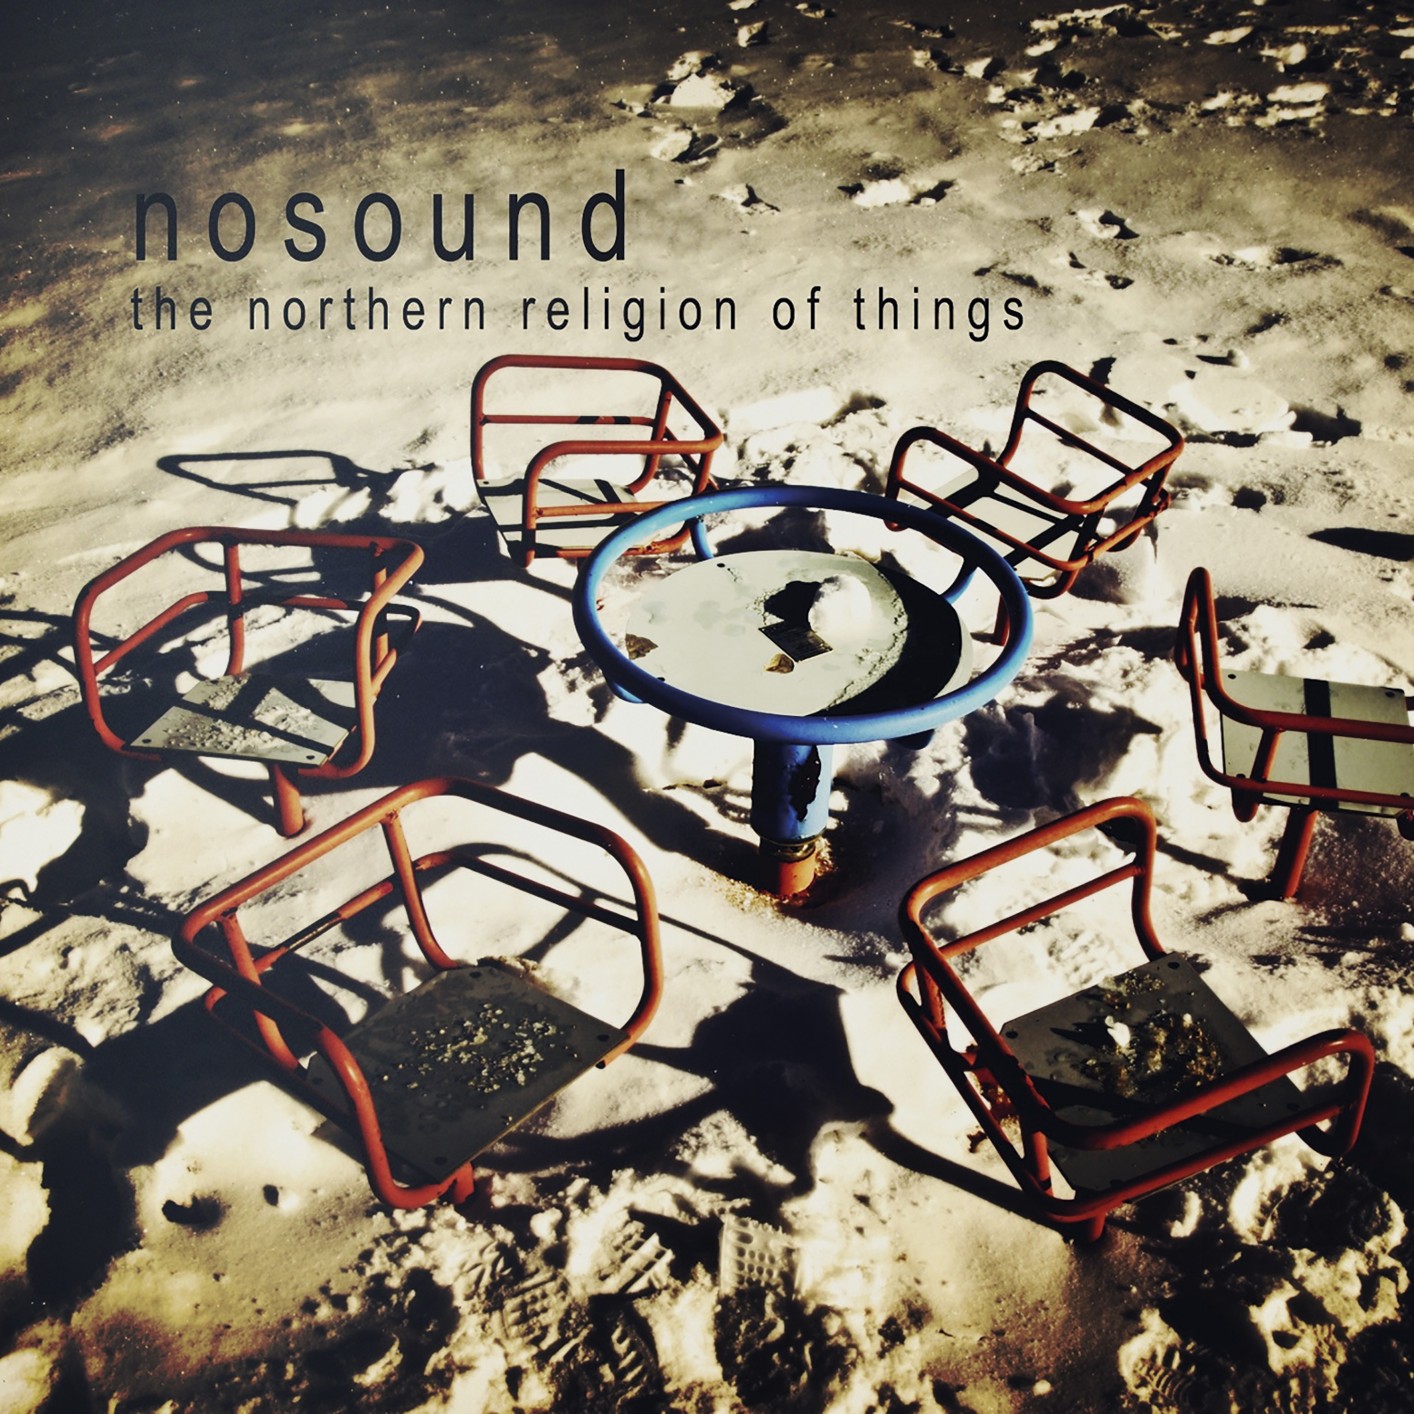 Nosound - The Northern Religion of Things (Remastered) (2011/2019) [FLAC 24bit/44,1kHz]